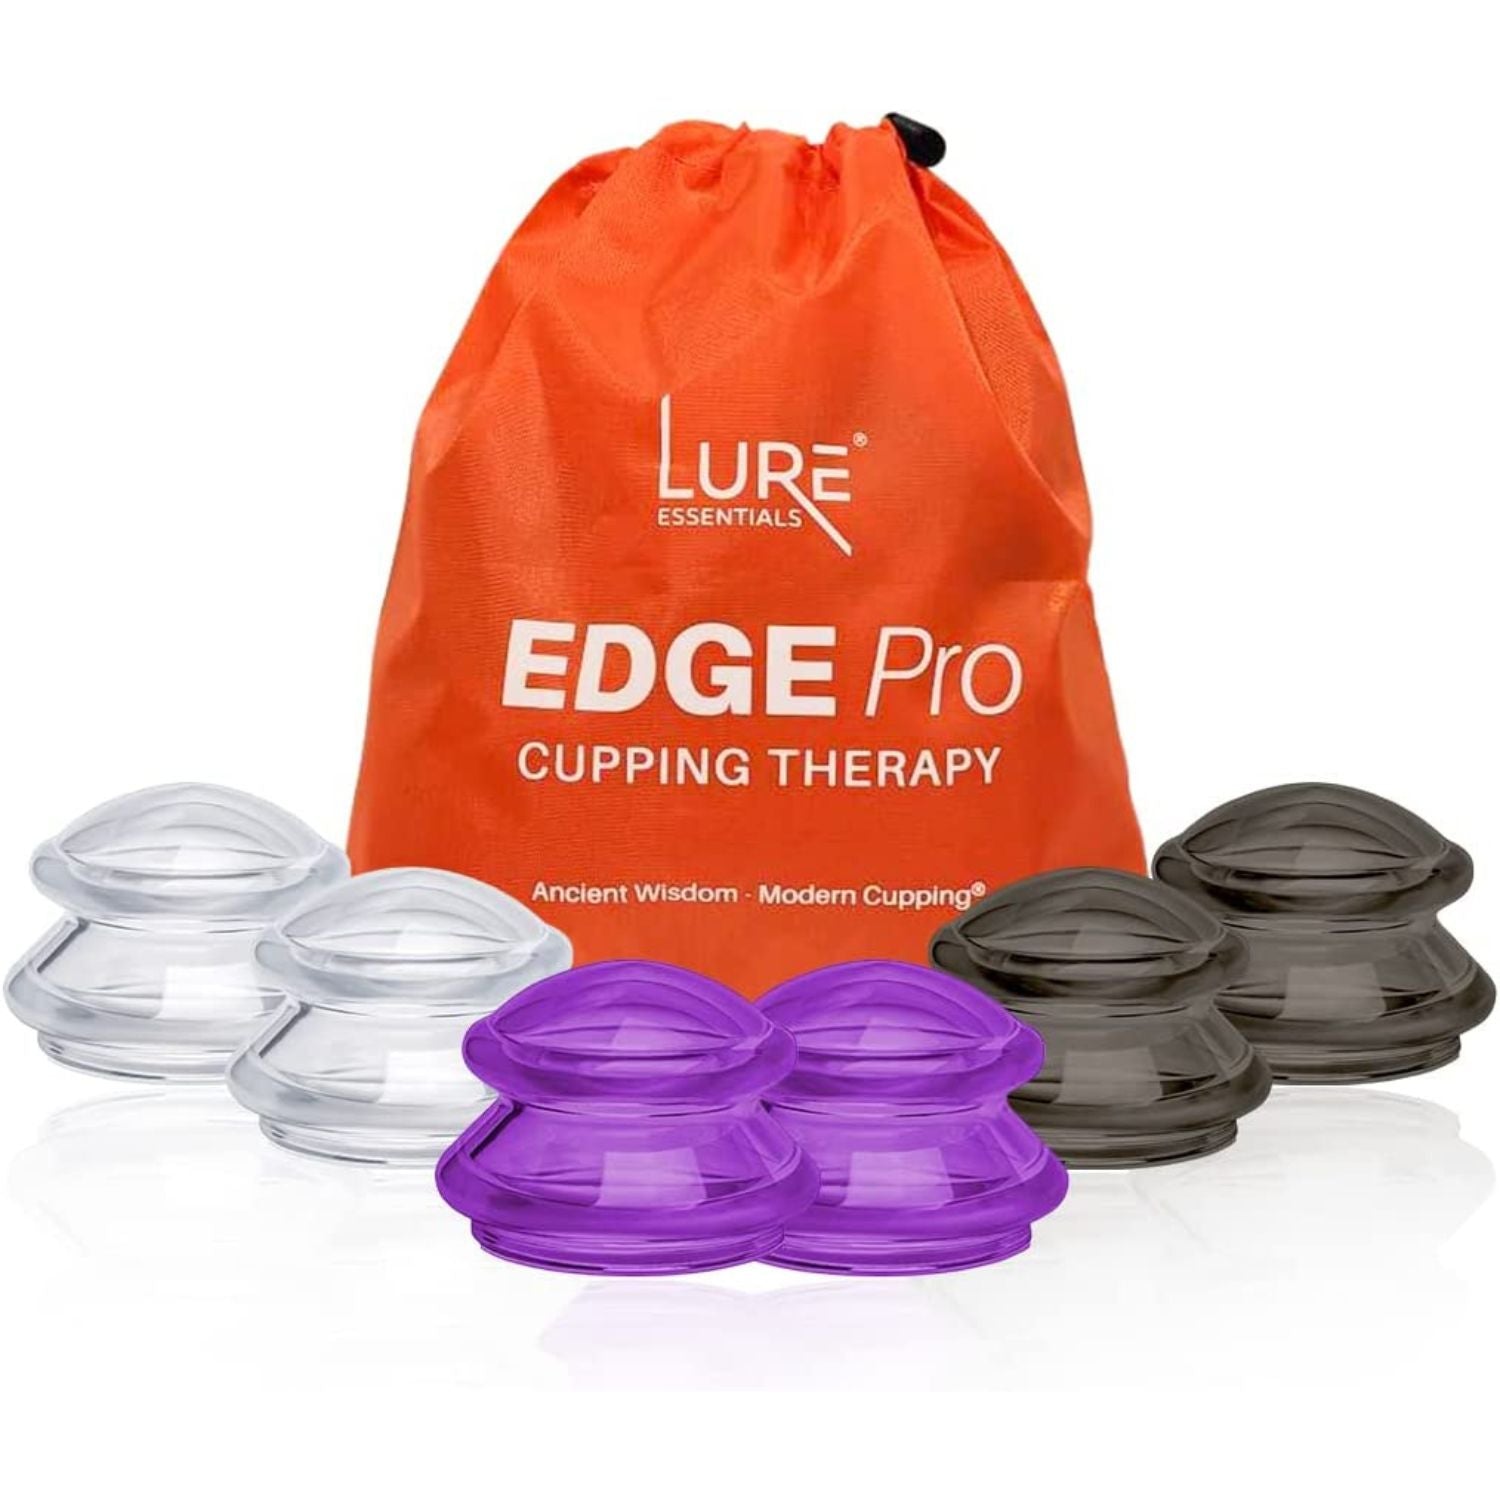 LURE Essentials Edge Cupping Set for Home Use and Massage Therapists,  Silicone Cupping Sets for Cellulite Reduction and…